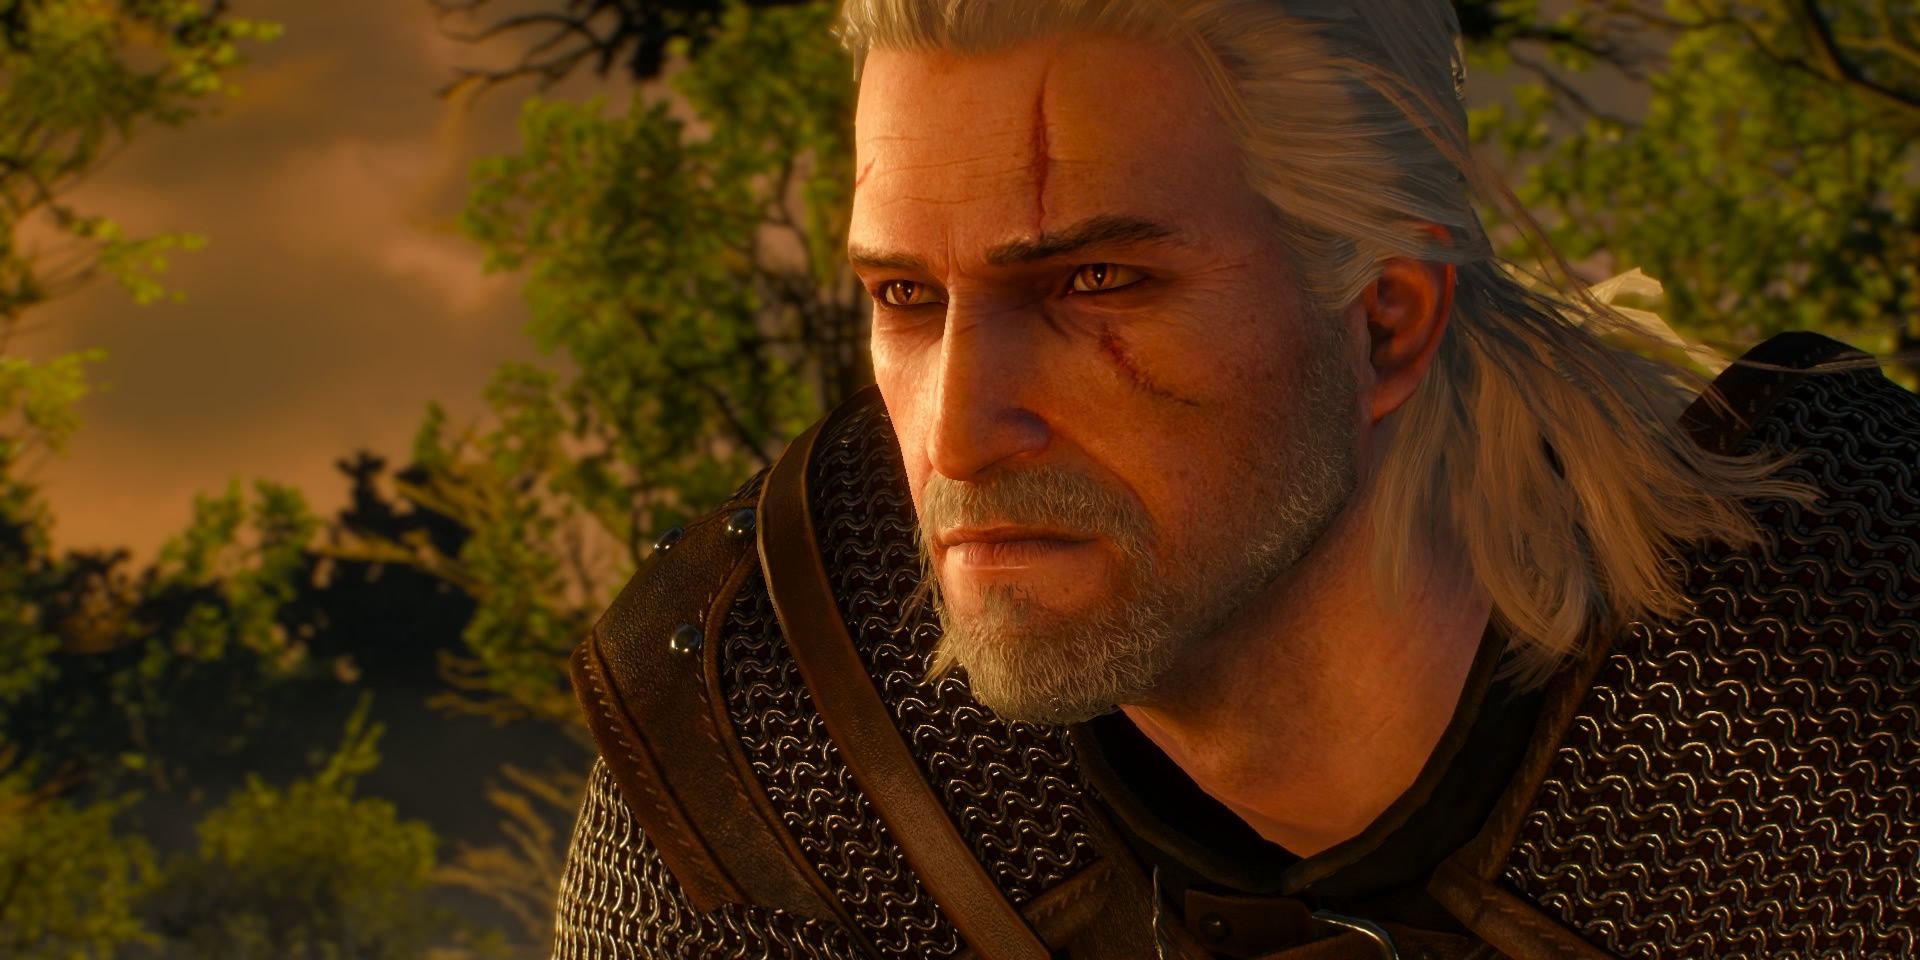 Geralt from The Witcher 3